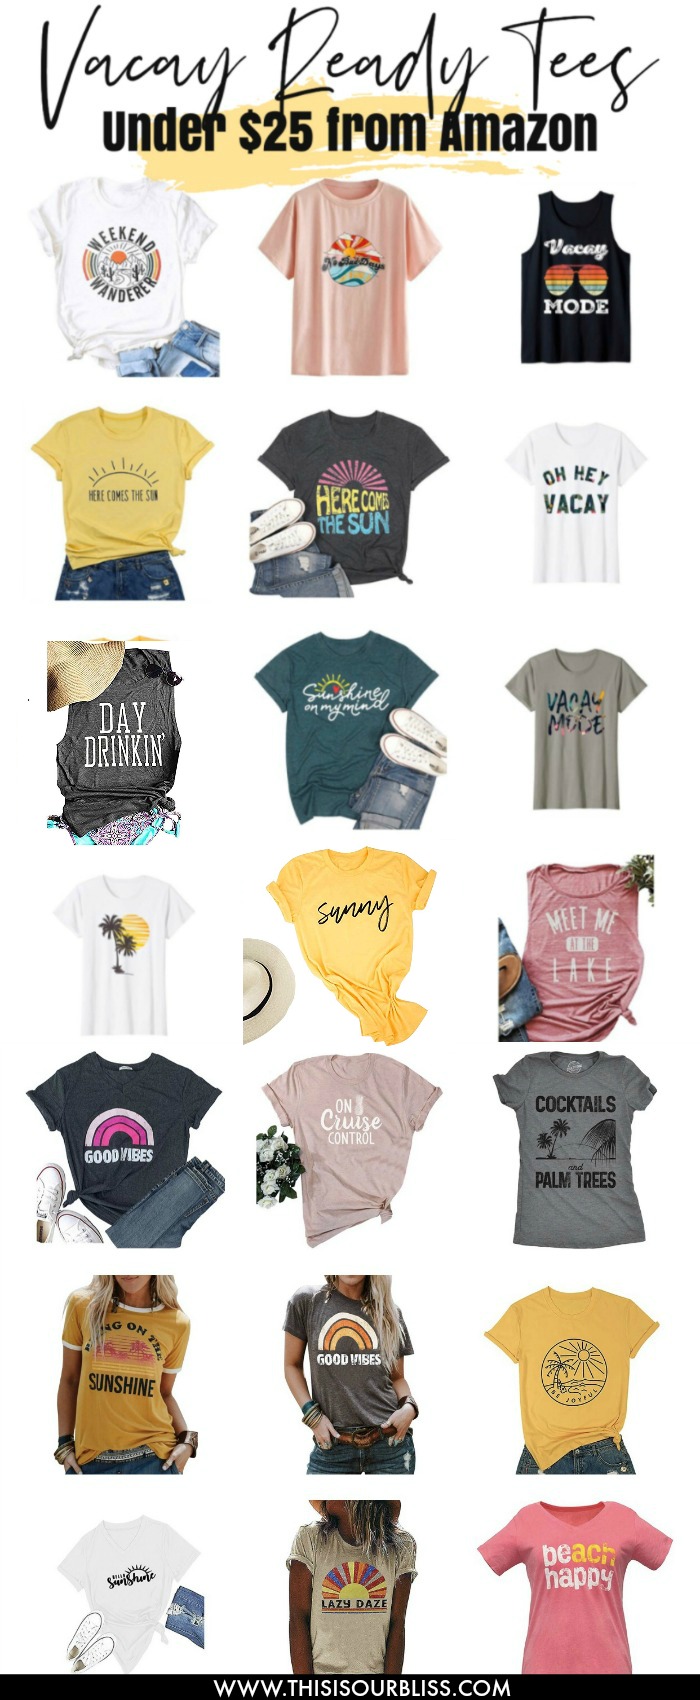 Vacay ready tees - Graphic tees under $25 from Amazon perfect for vacation - This is our Bliss